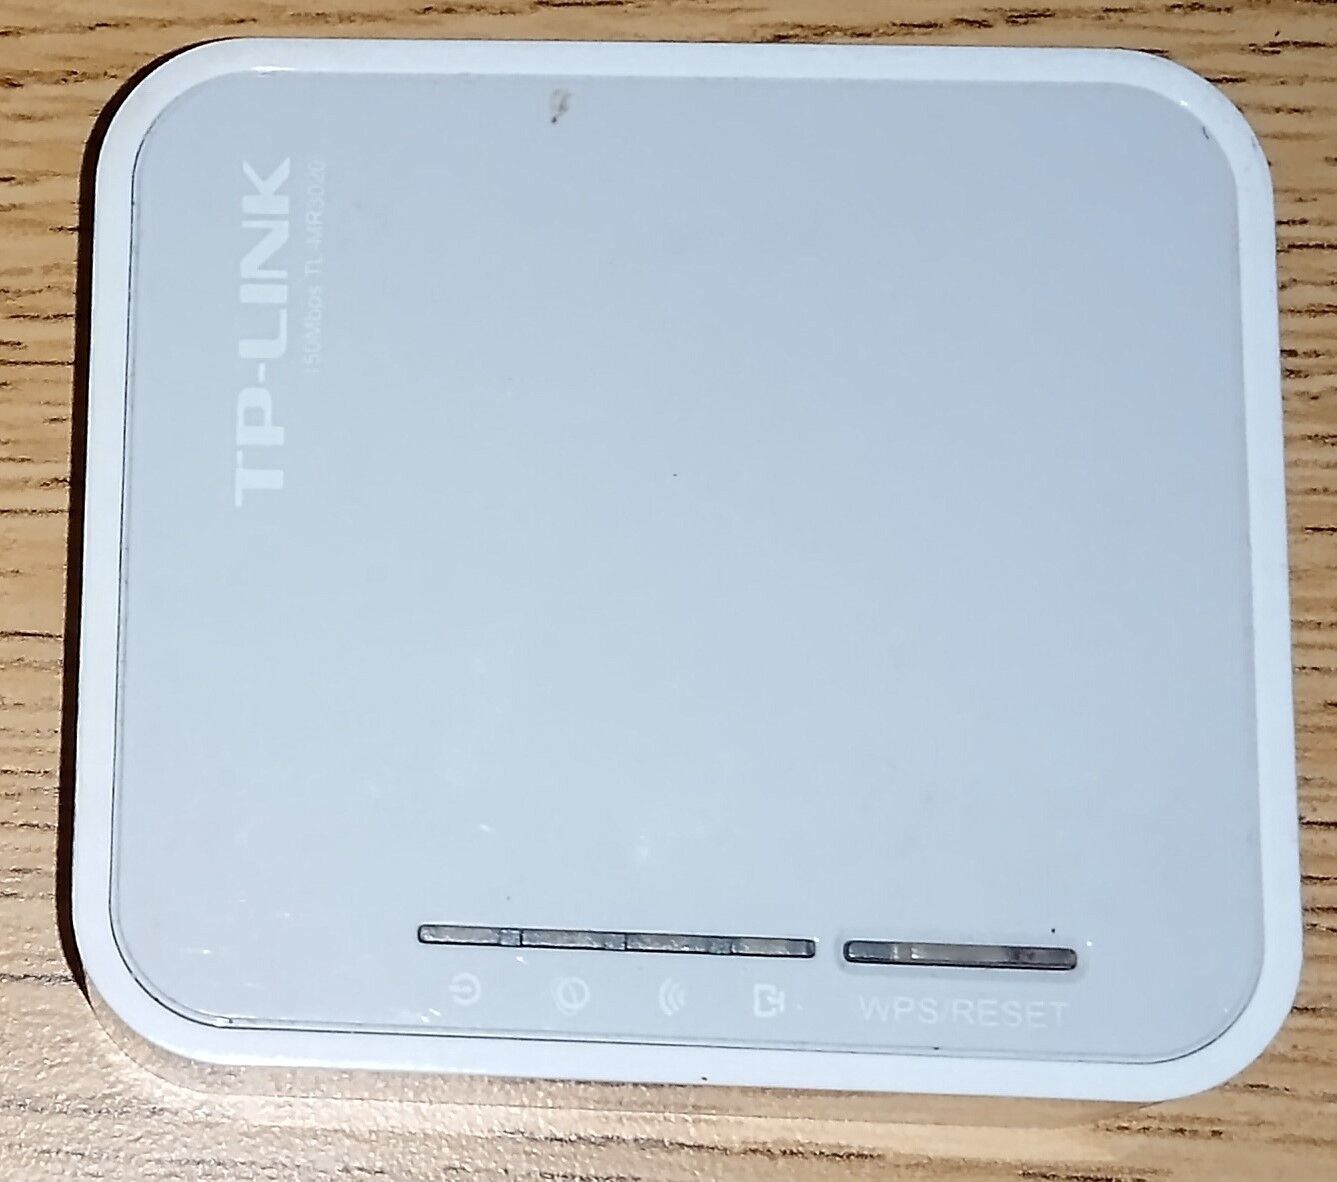 TP-Link TL-MR3020 Portable Wireless N Router/Access Point 3G/4G Tested Good